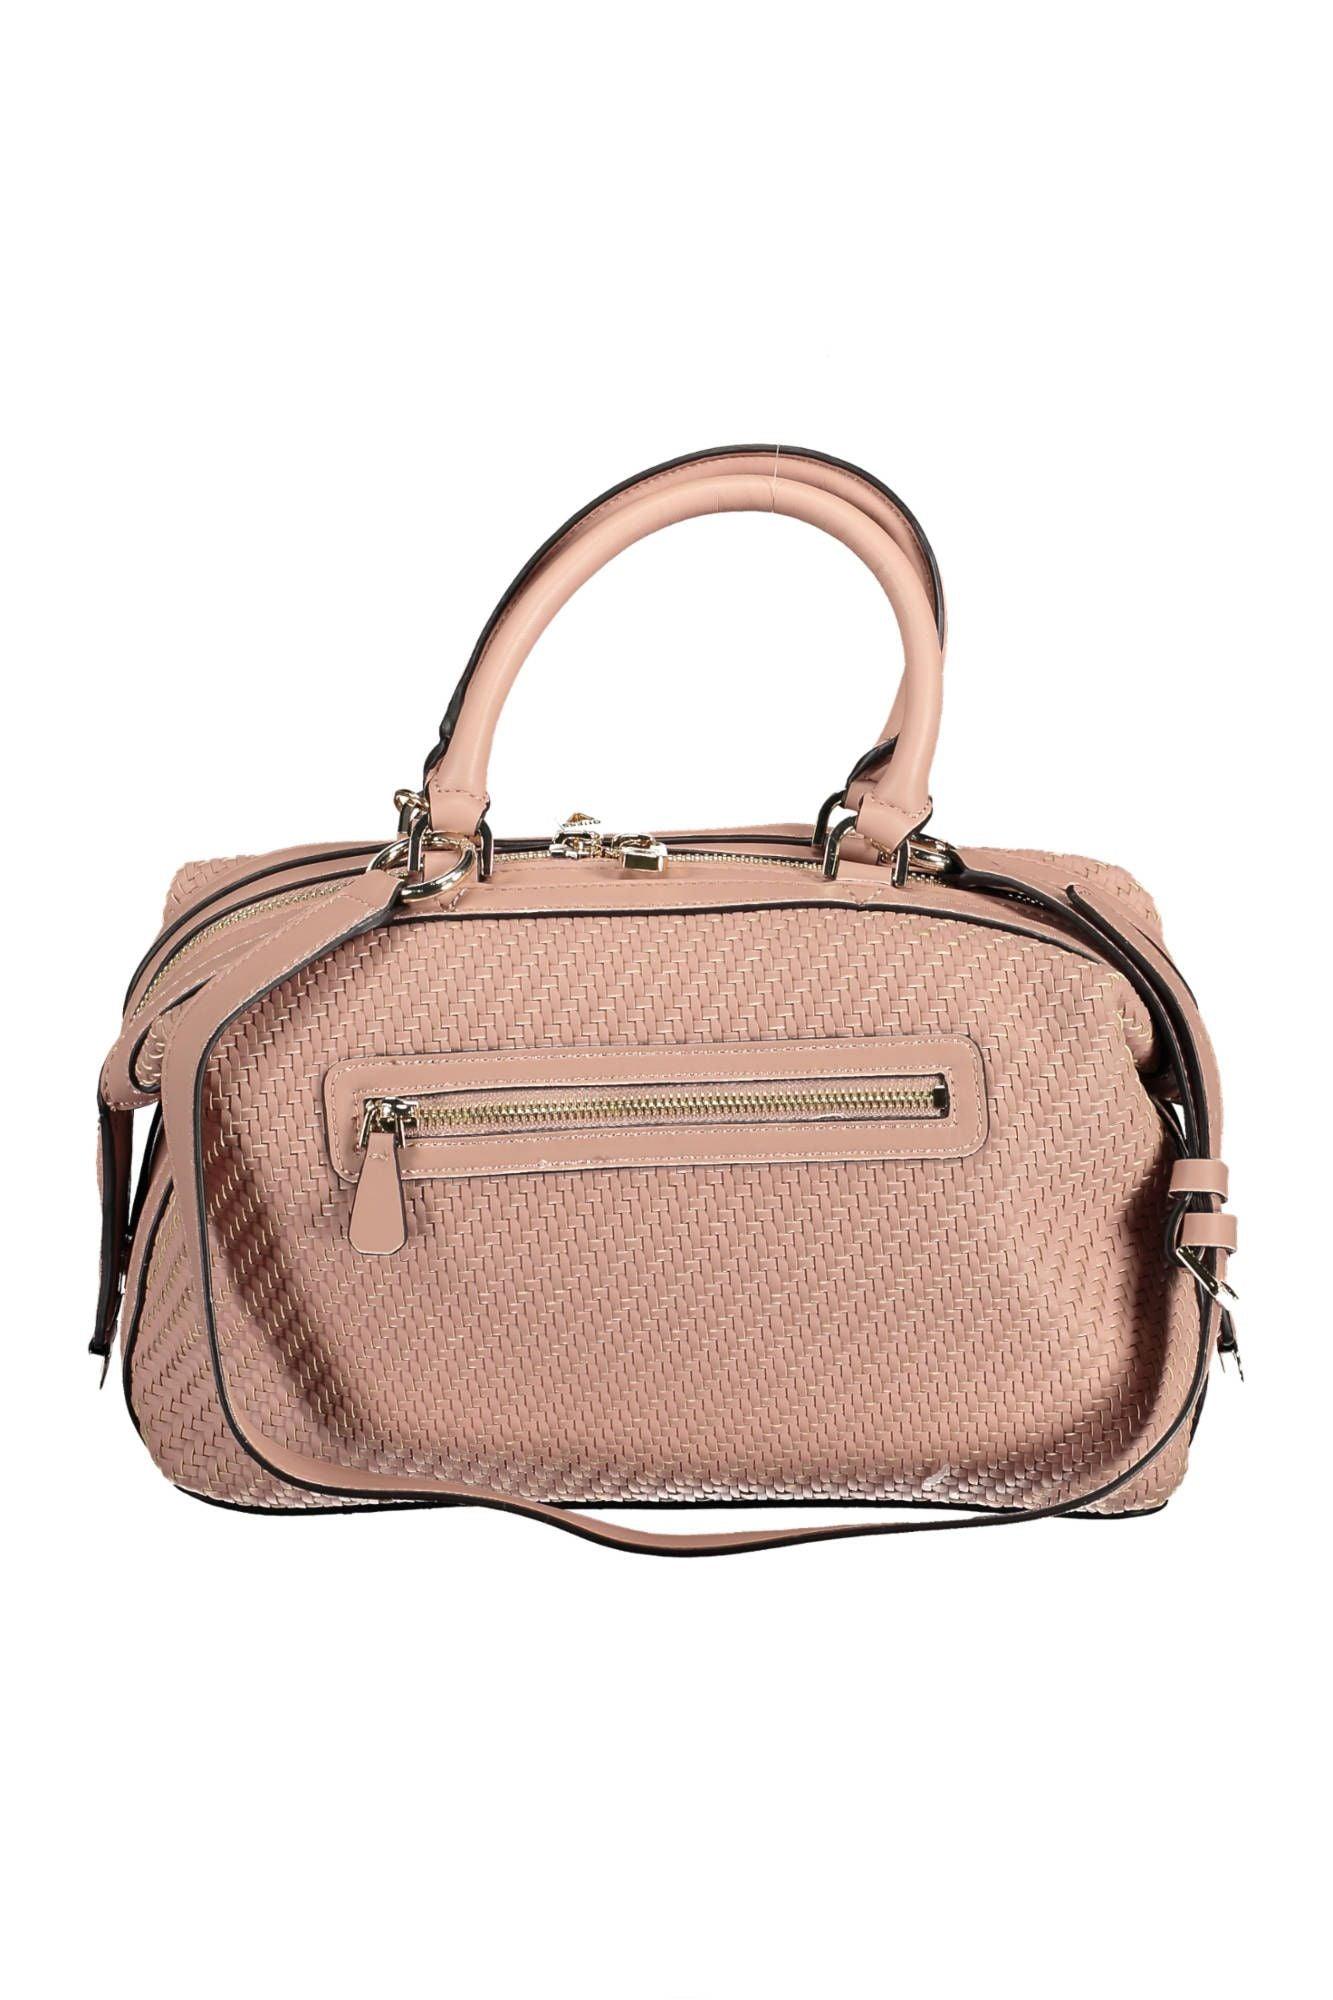 Guess Jeans Chic Pink Satchel with Contrasting Details - PER.FASHION